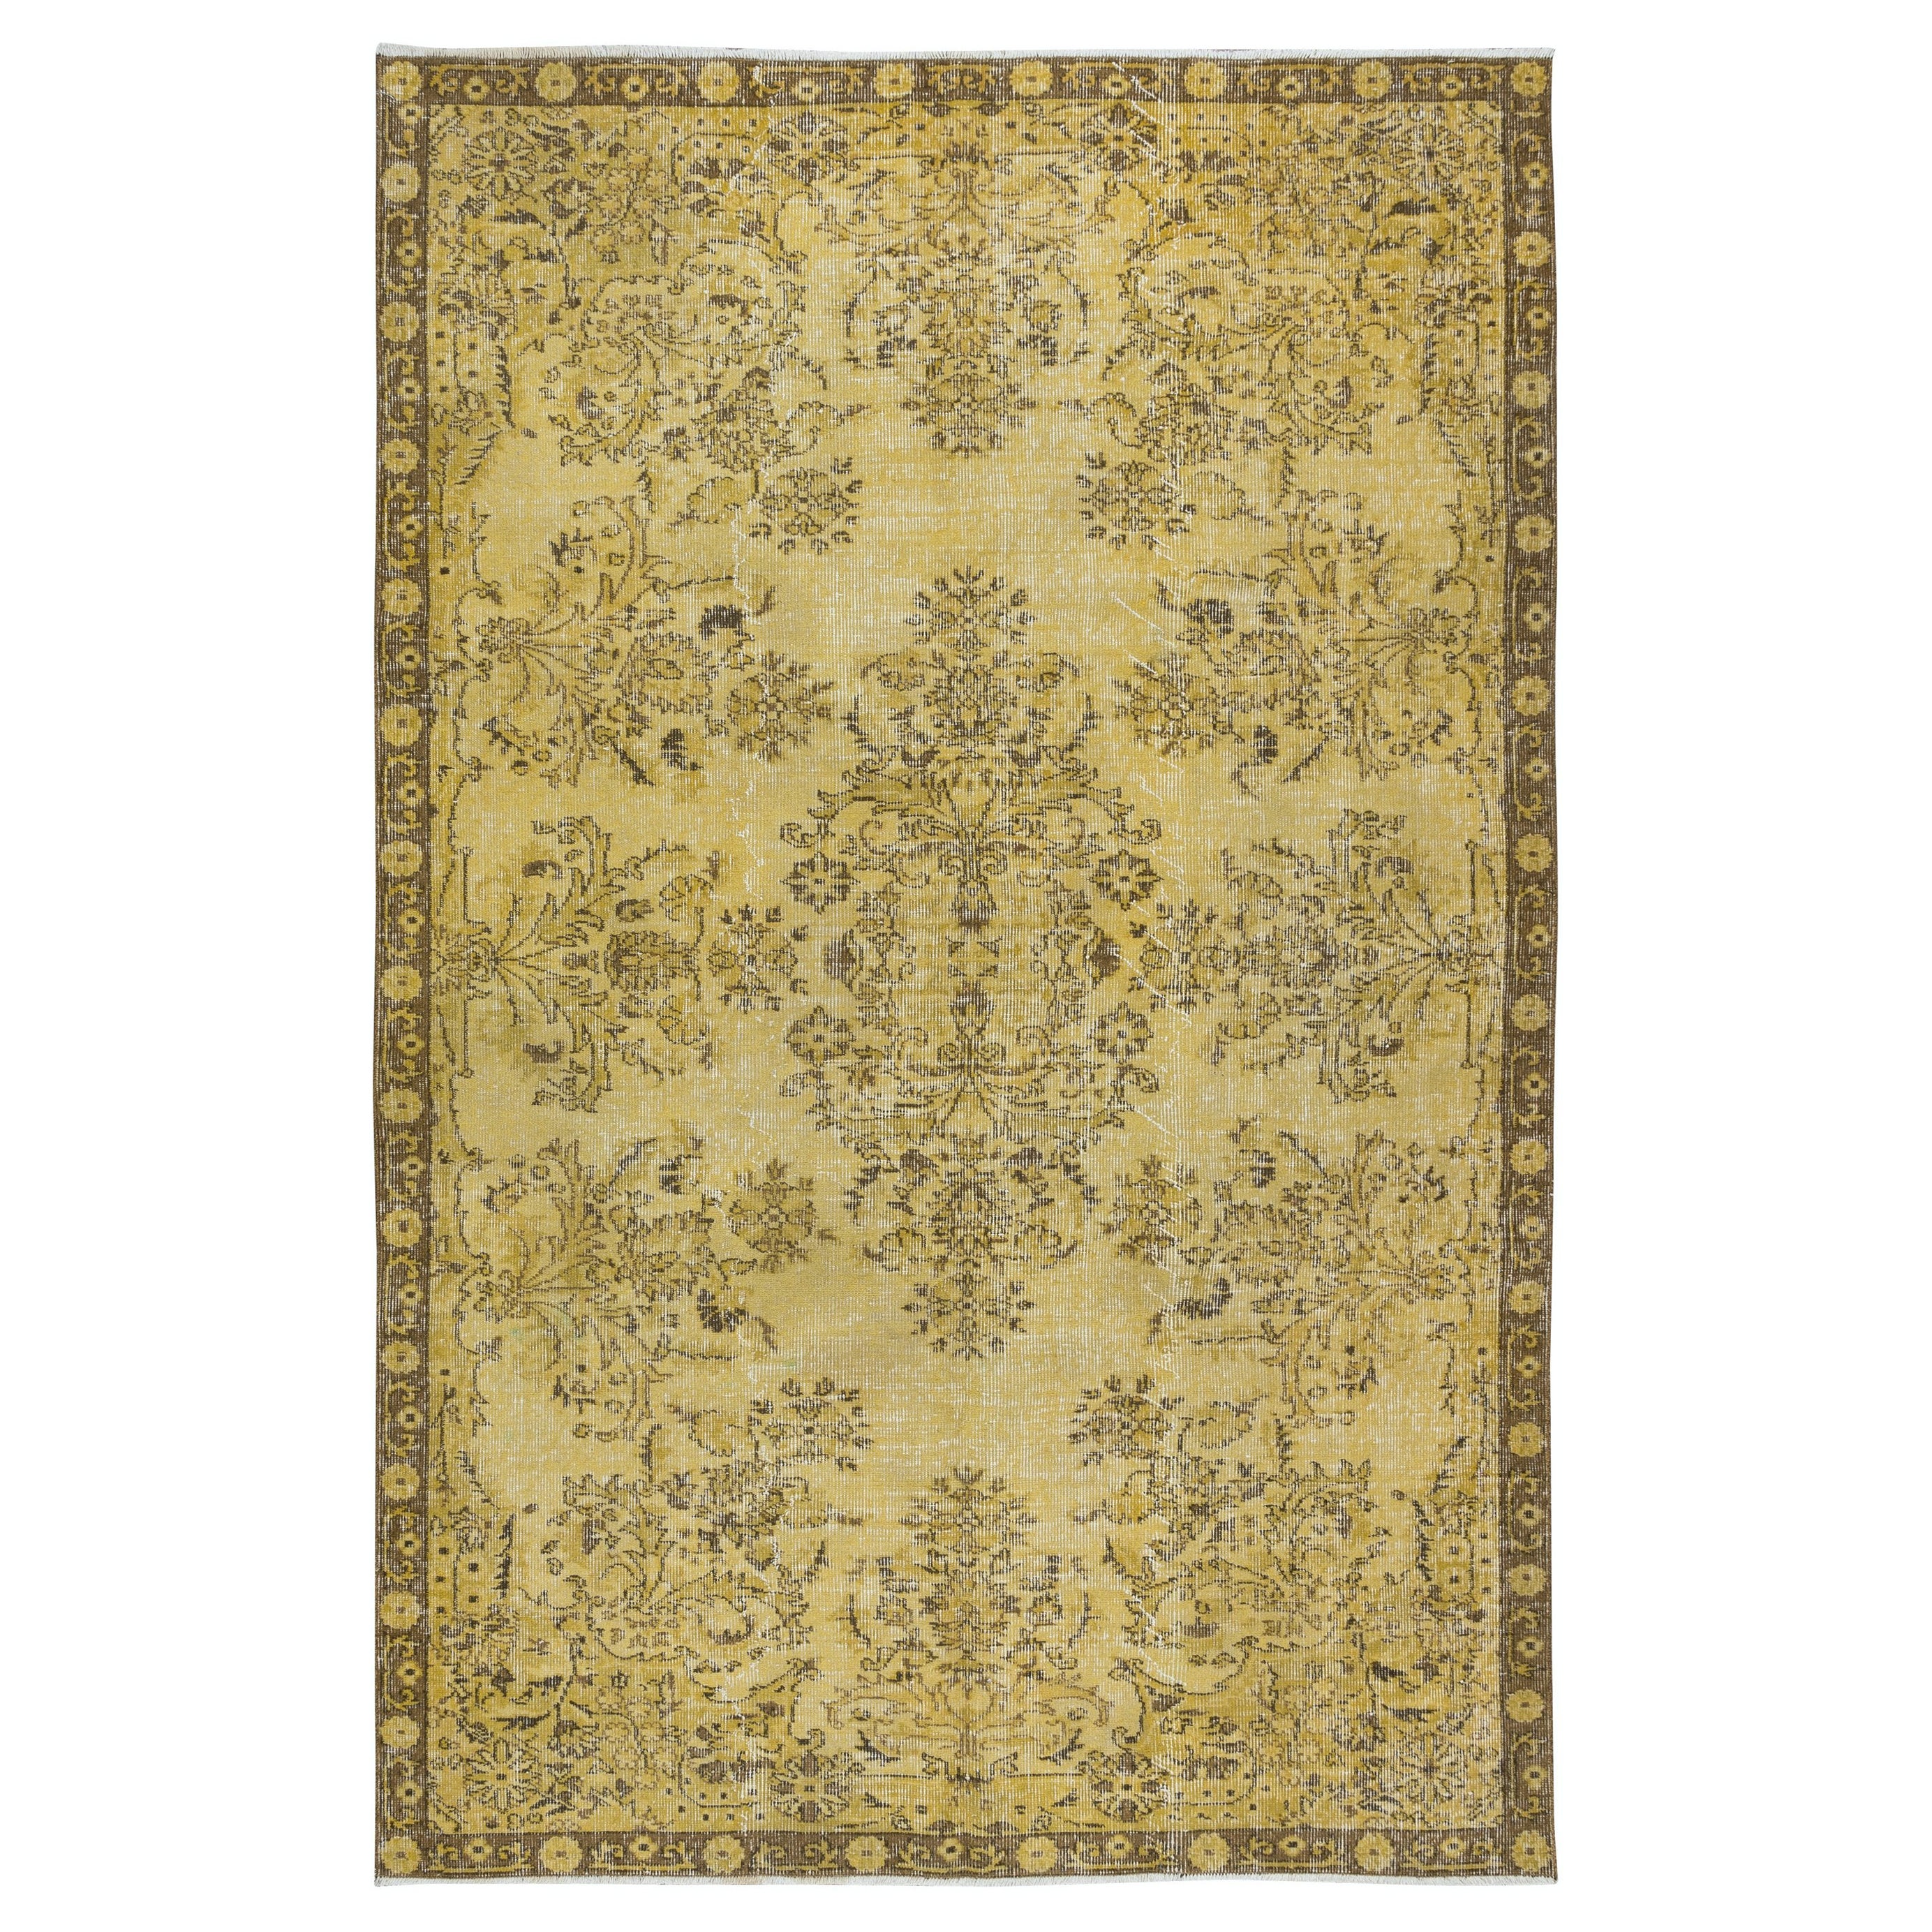 5.7x9.5 Ft Modern Hand Knotted Turkish Wool Area Rug Re-Dyed in Yellow